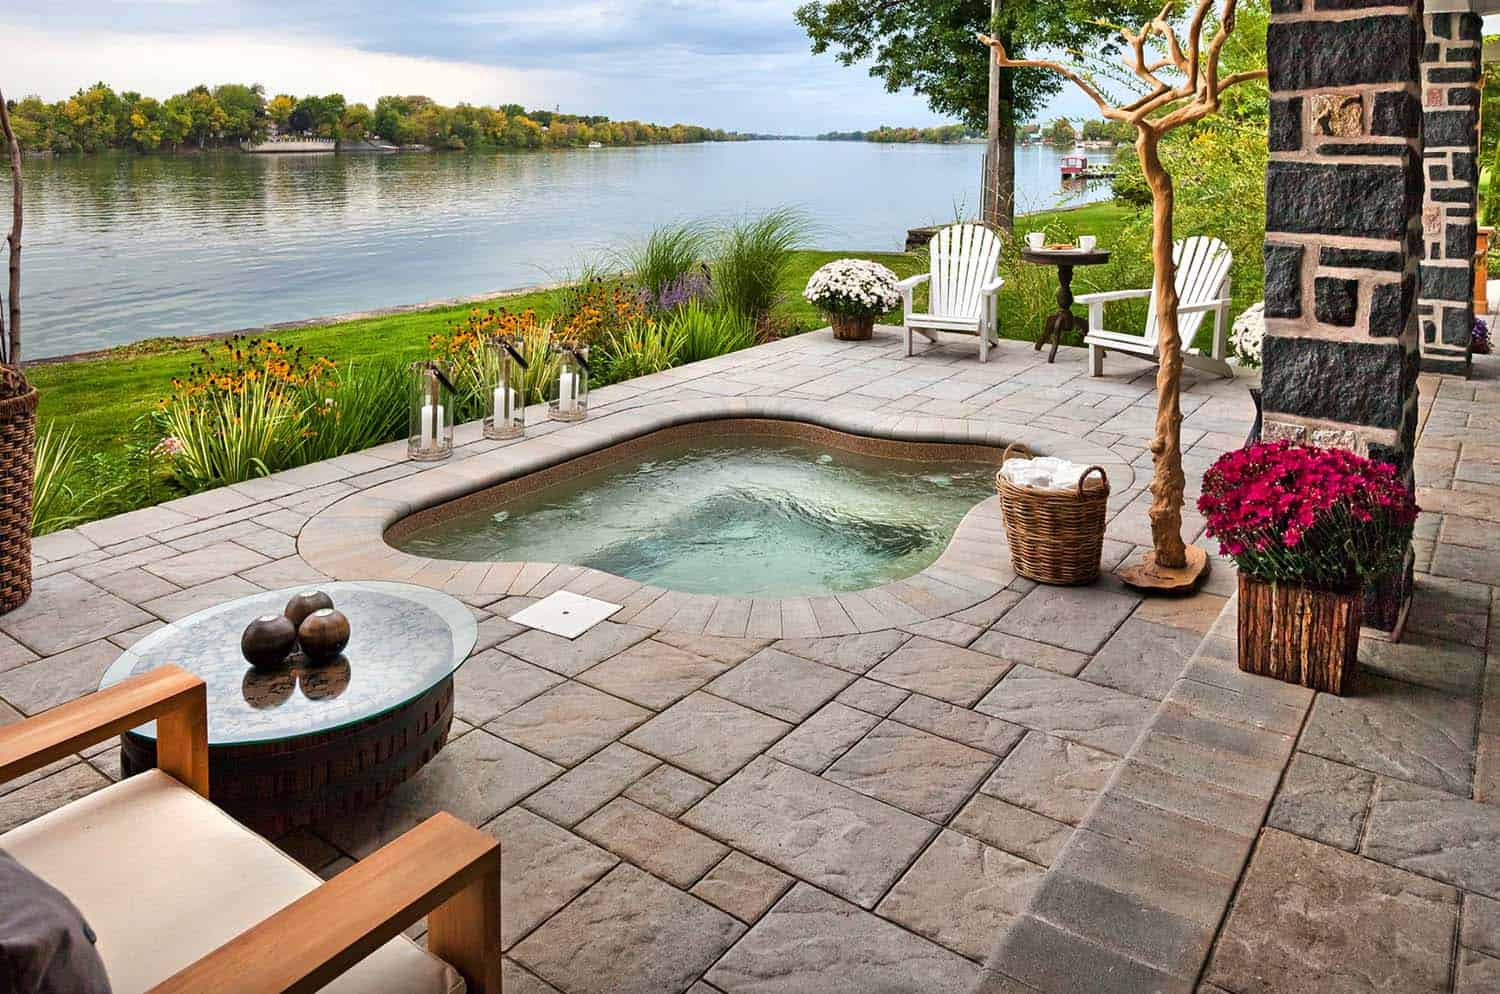 40+ Outstanding Hot Tub Ideas To Create A Backyard Oasis